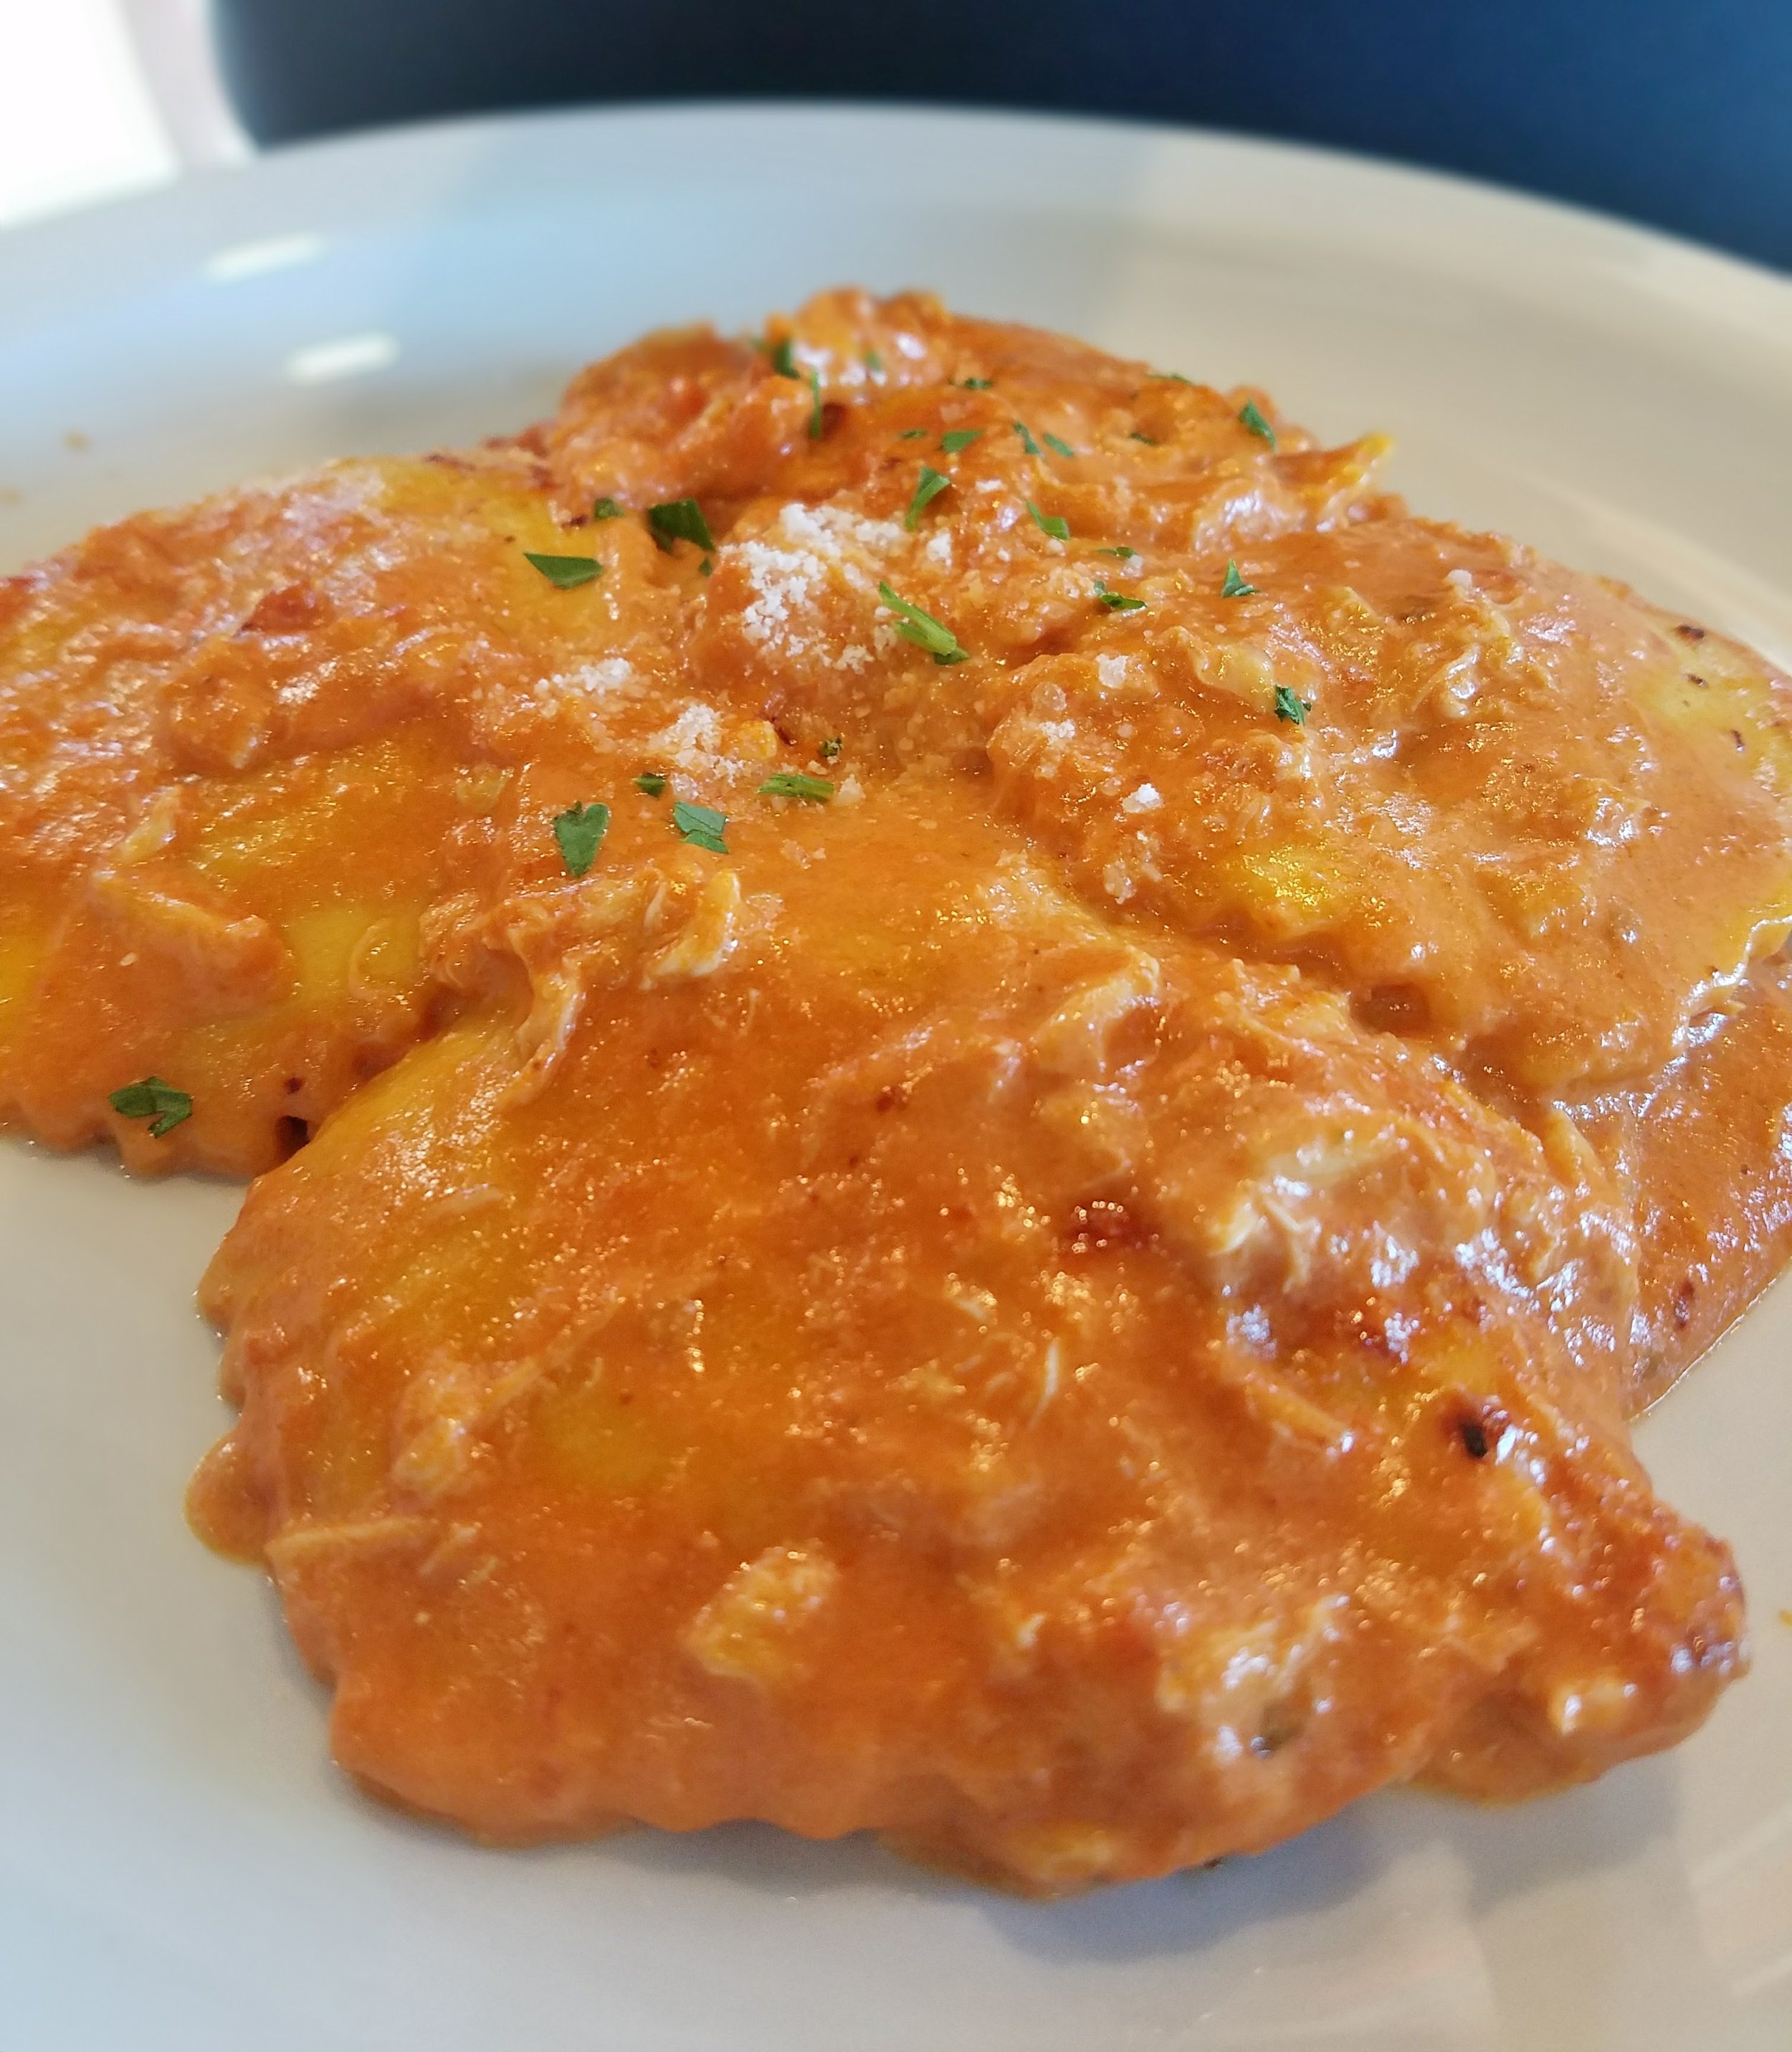 Lobster ravioli with crabmeat sauce (a special)